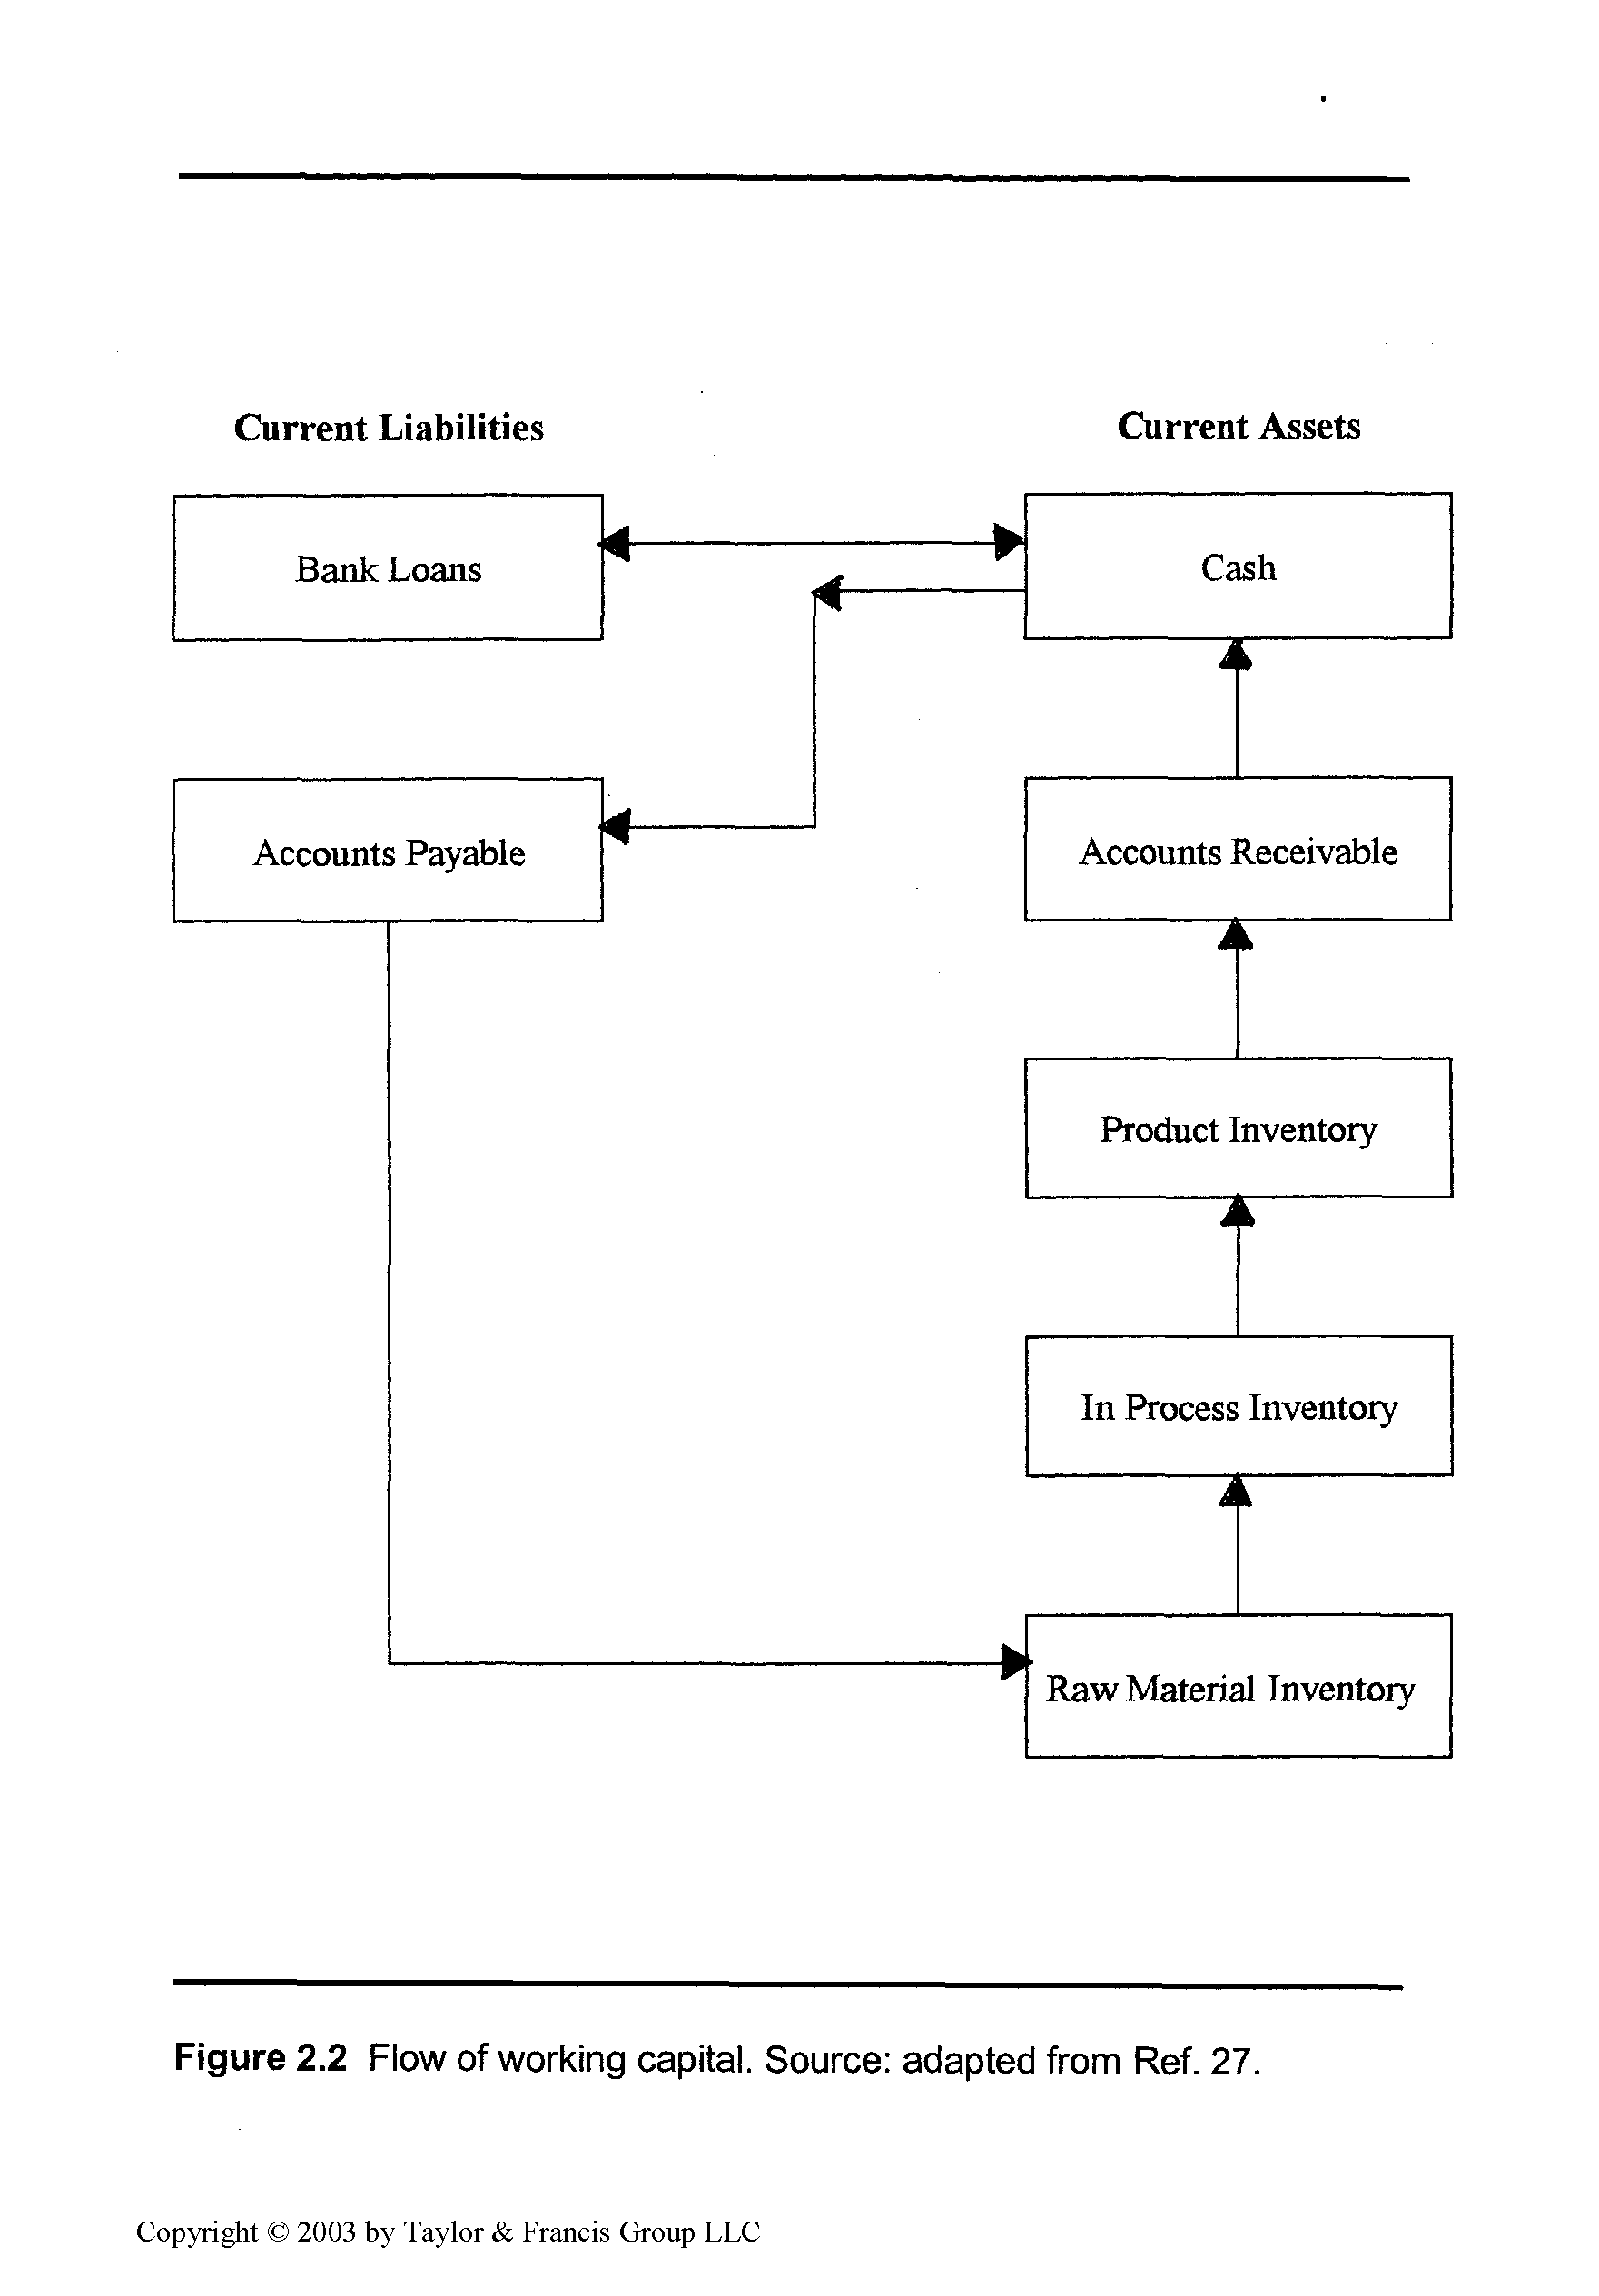 Figure 2.2 Flow of working capital. Source adapted from Ref. 27.